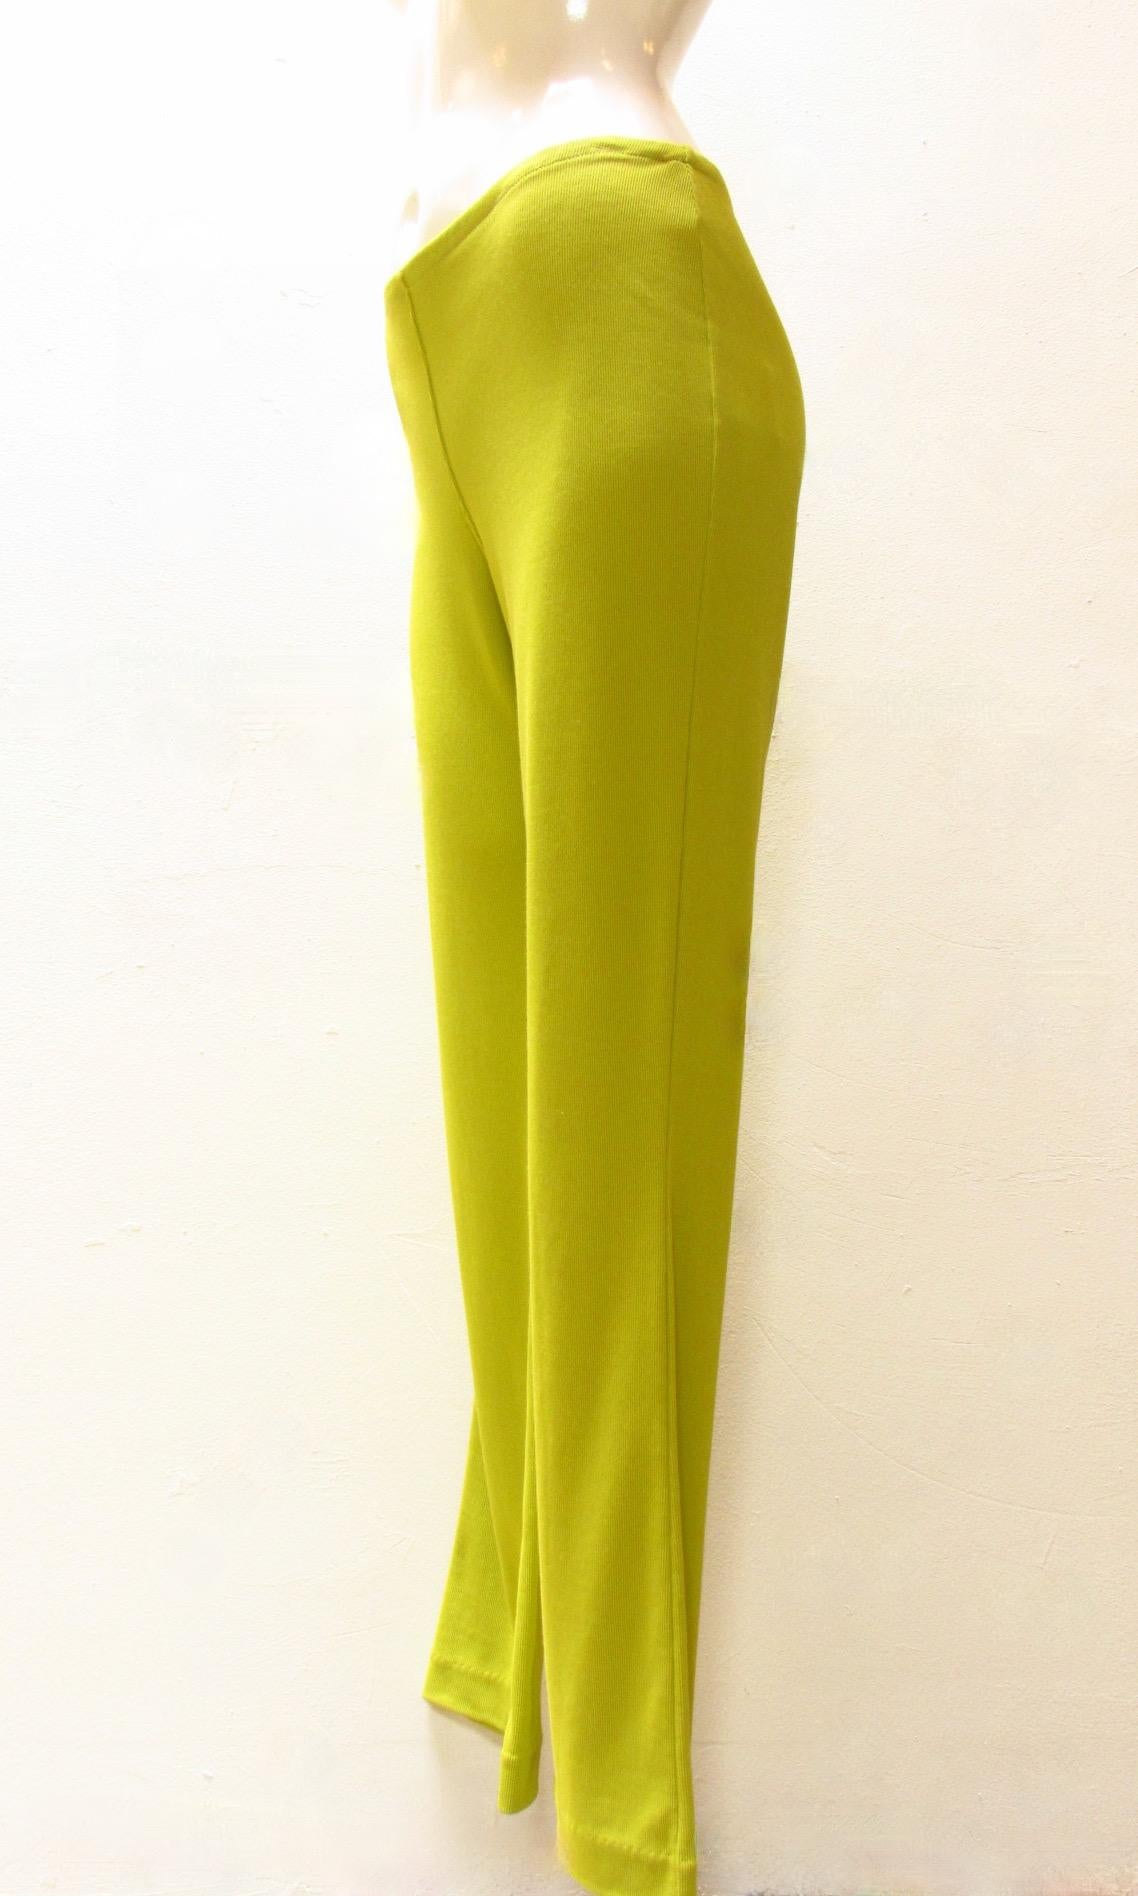 Incredibly soft stretch pants from vintage Matsuda in chartreuse green. Moniker is printed on inner side of elastic waist.